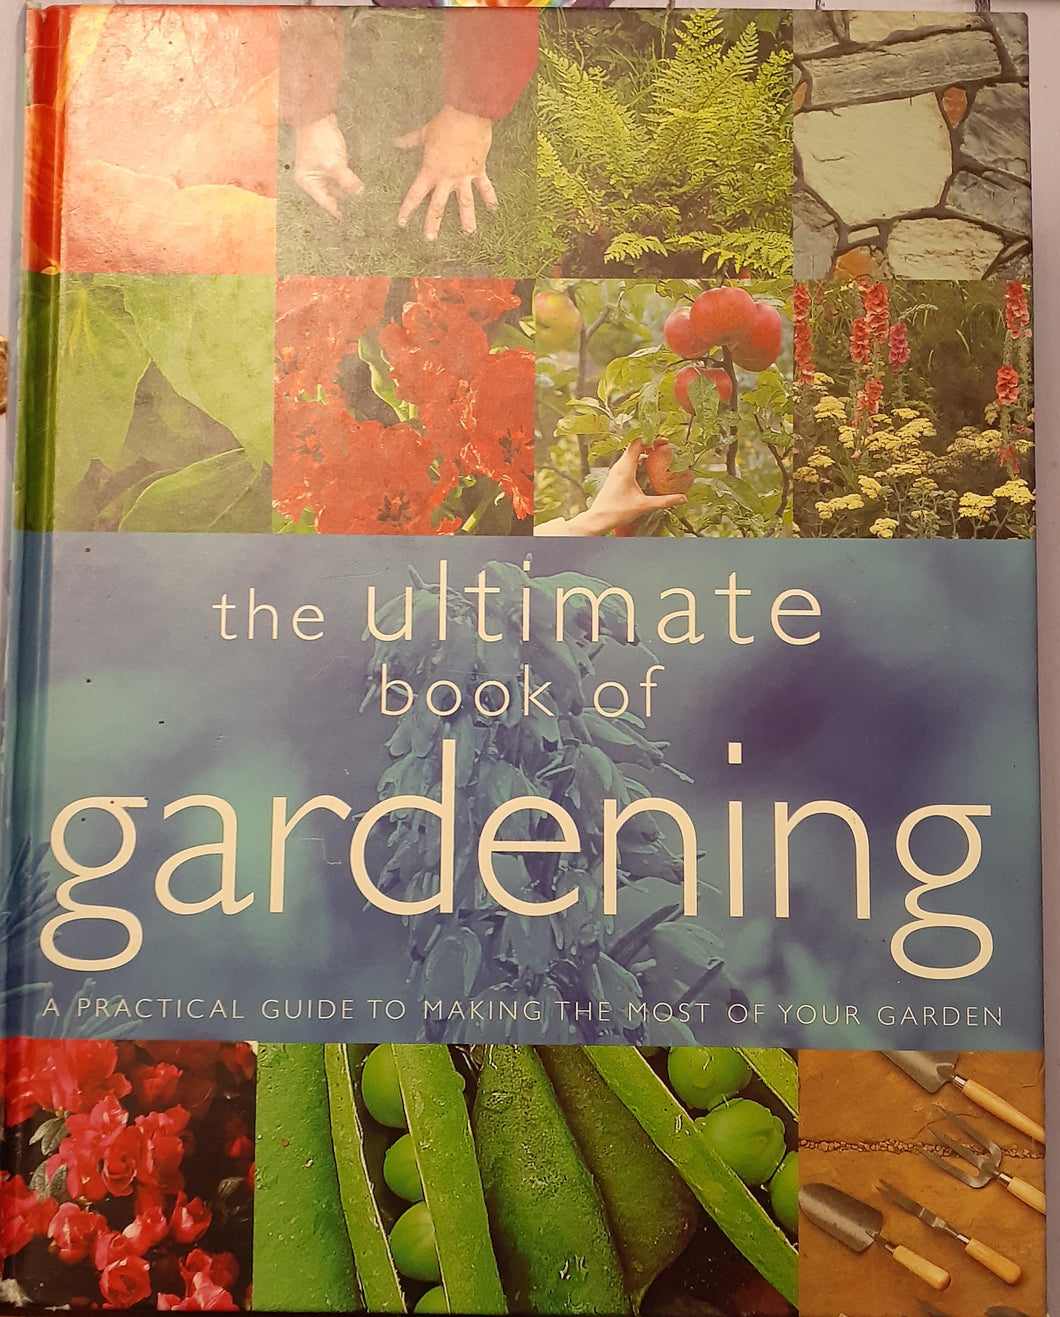 The Ultimate Book of Gardening